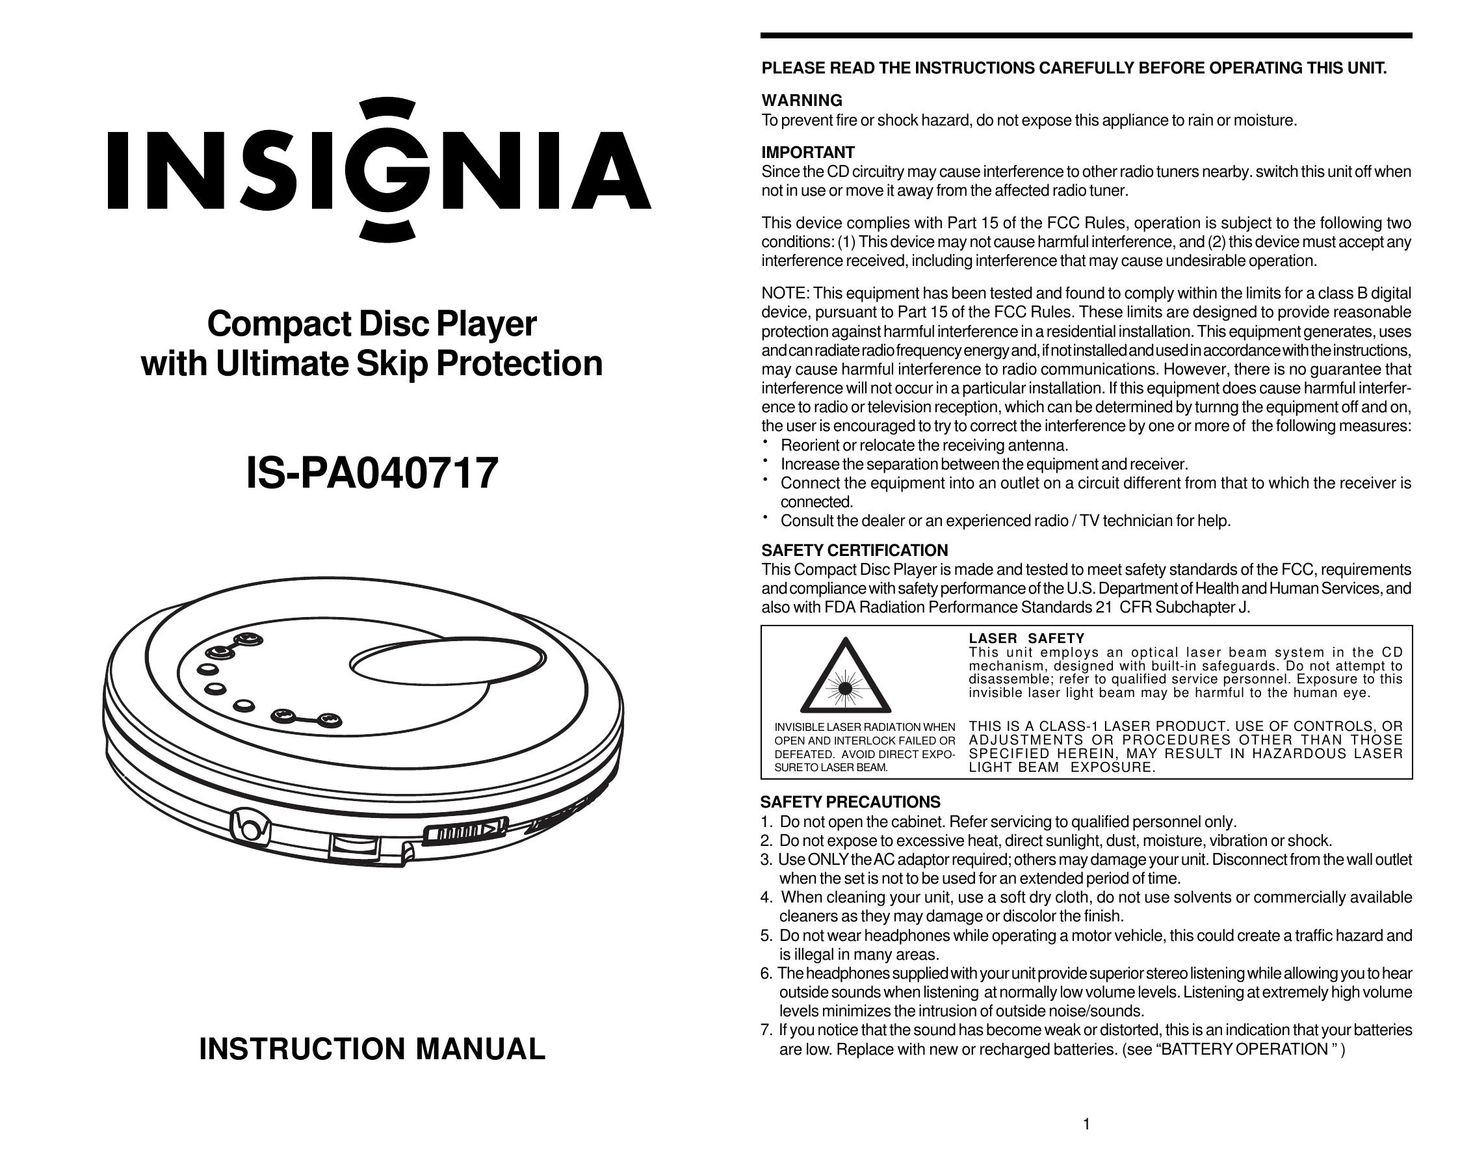 Insignia IS-PA040717 CD Player User Manual